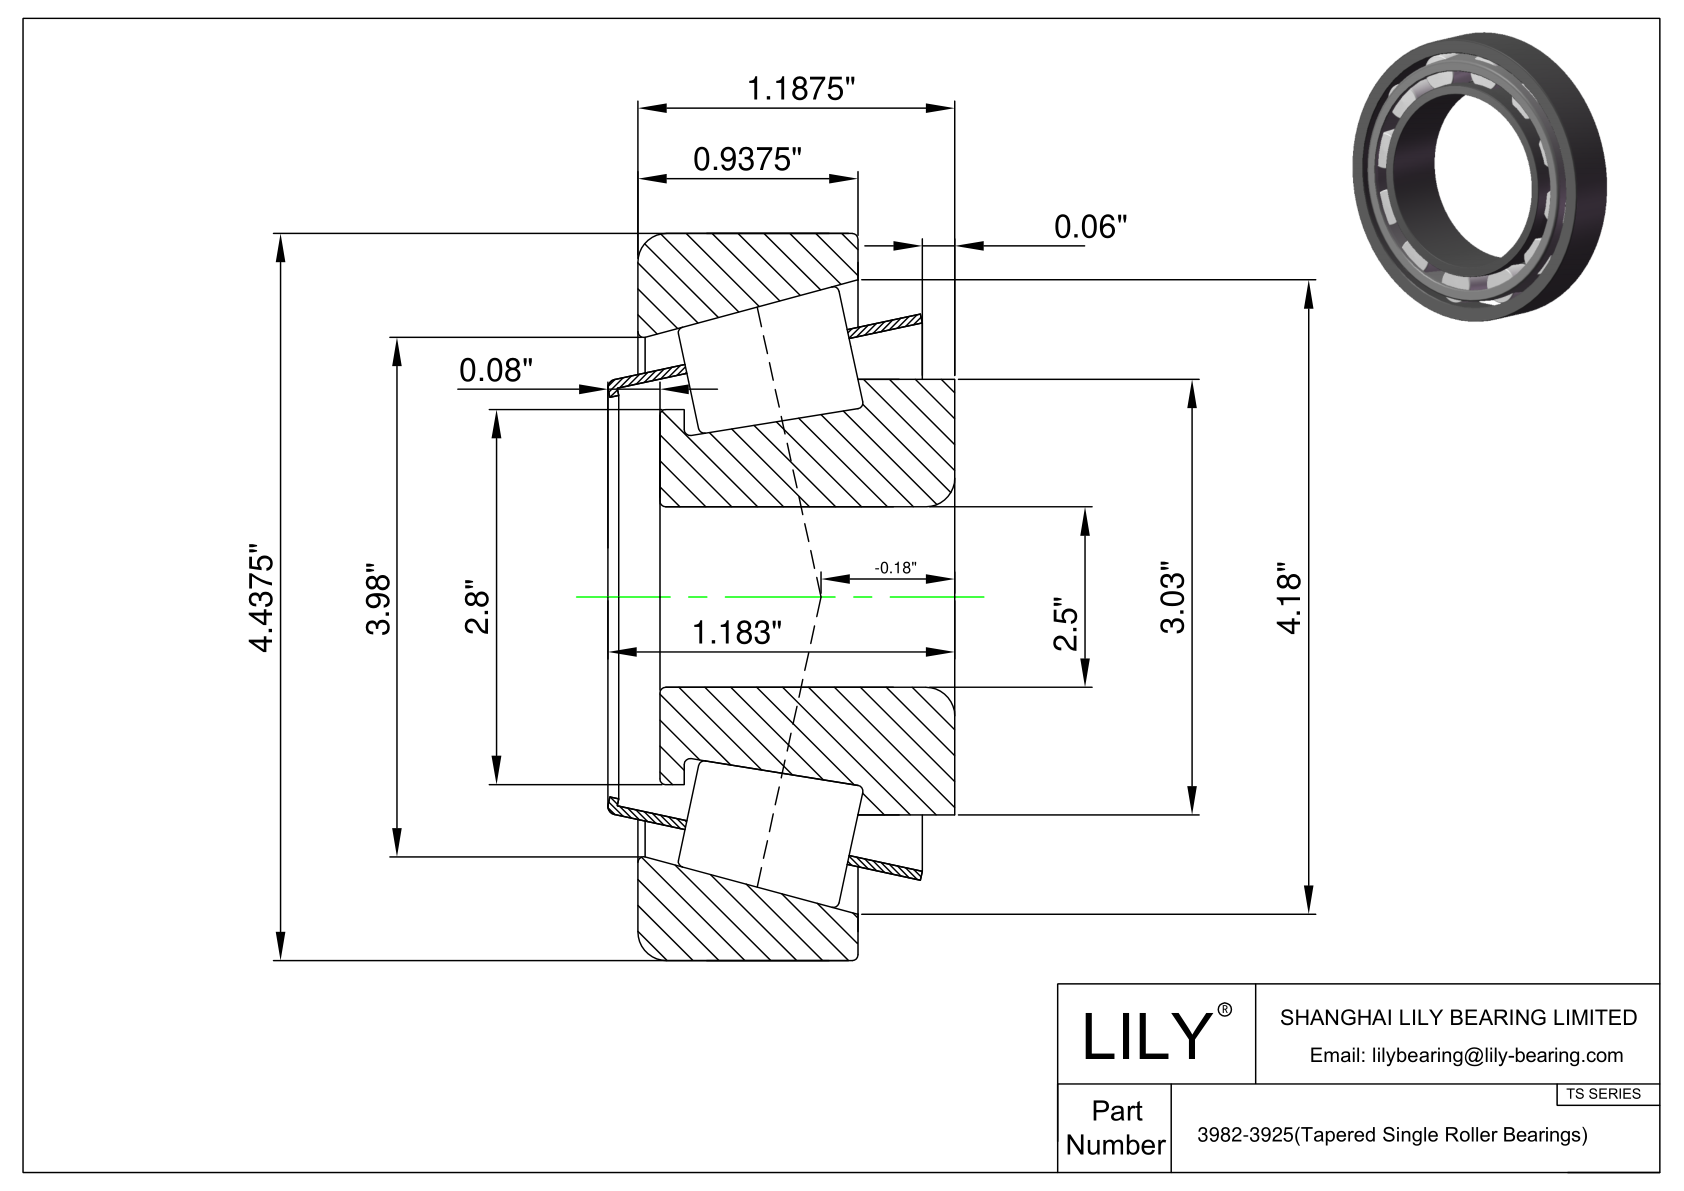 3982-3925 TS (Tapered Single Roller Bearings) (Imperial) cad drawing